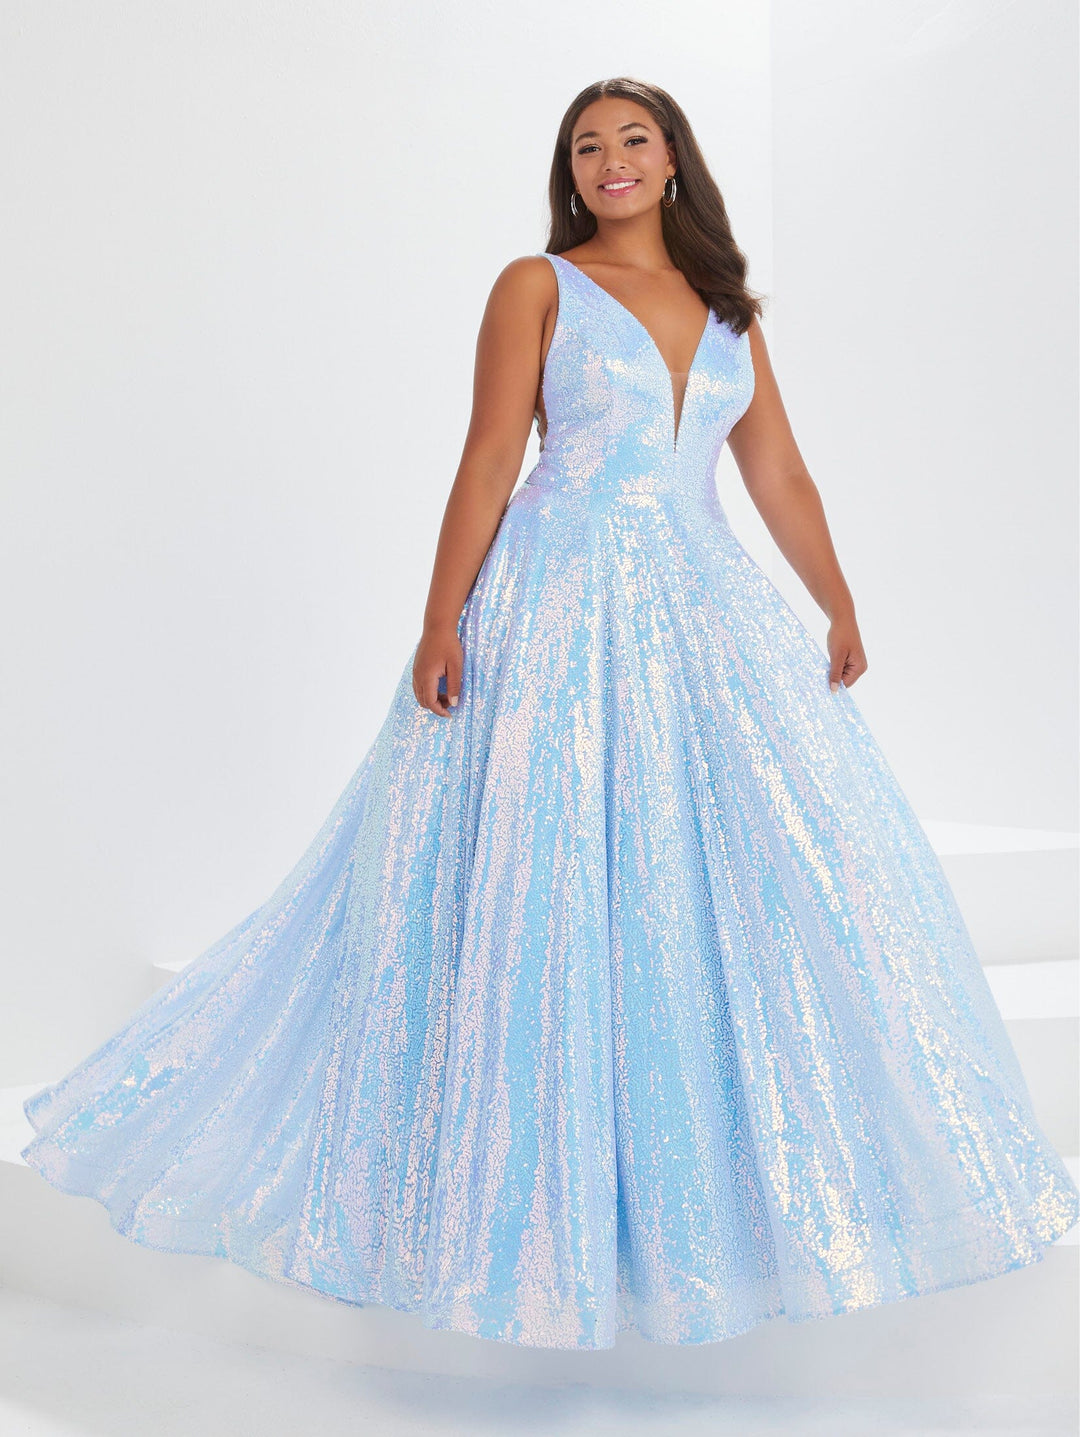 Plus Size Sleeveless Sequin Gown by Tiffany Designs 16046